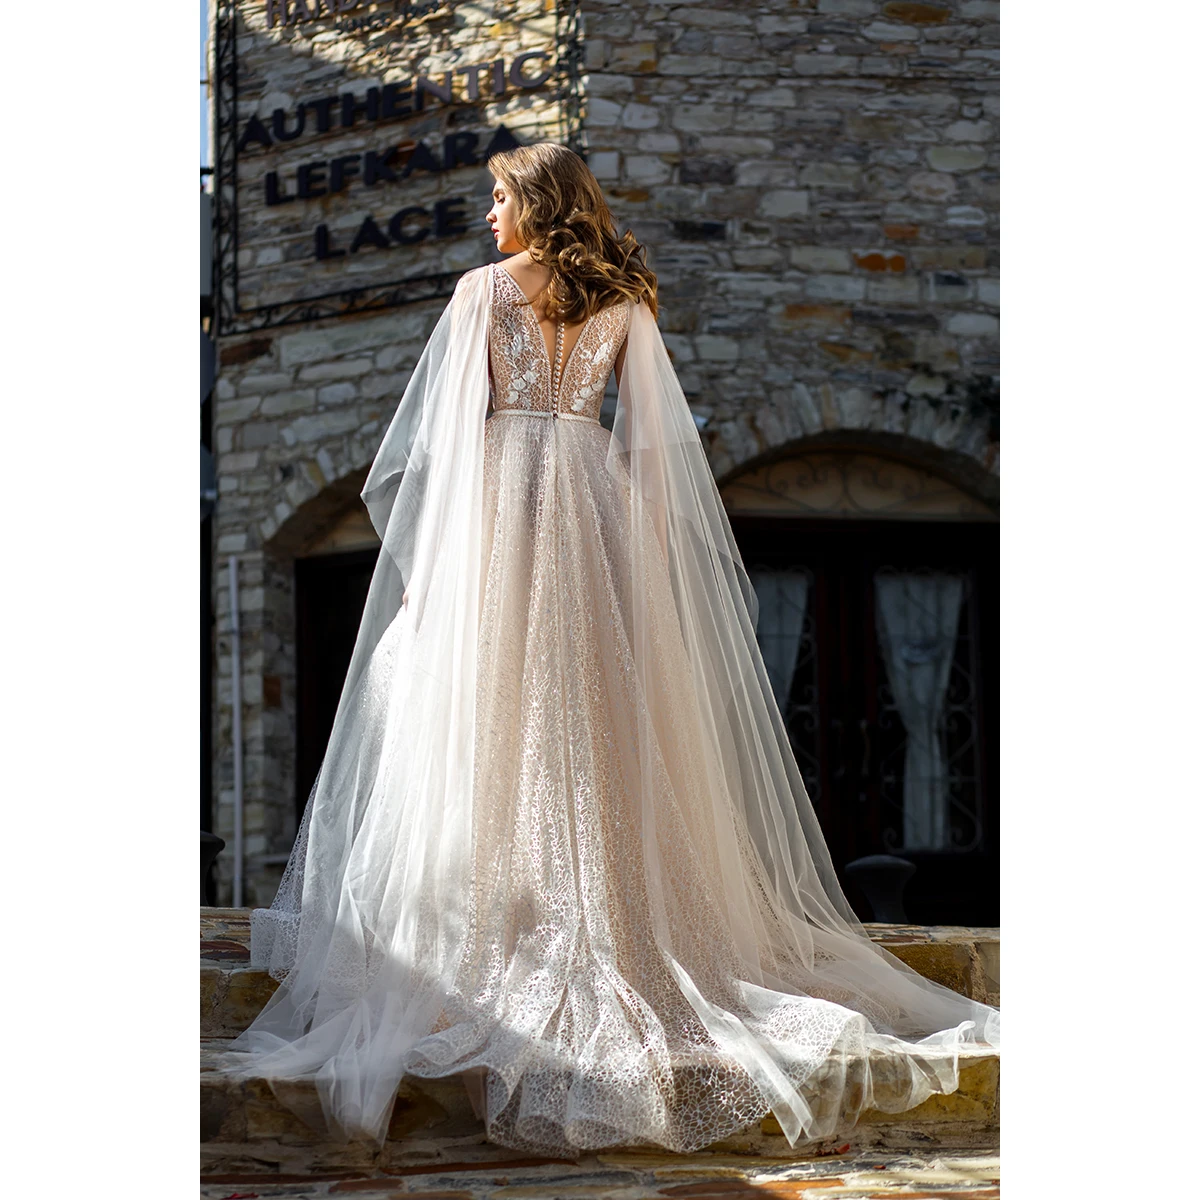 Bridal wedding gowns dress Estelavia “Julie” – soft lines and sharp edges, femininity and strength, tenderness and power